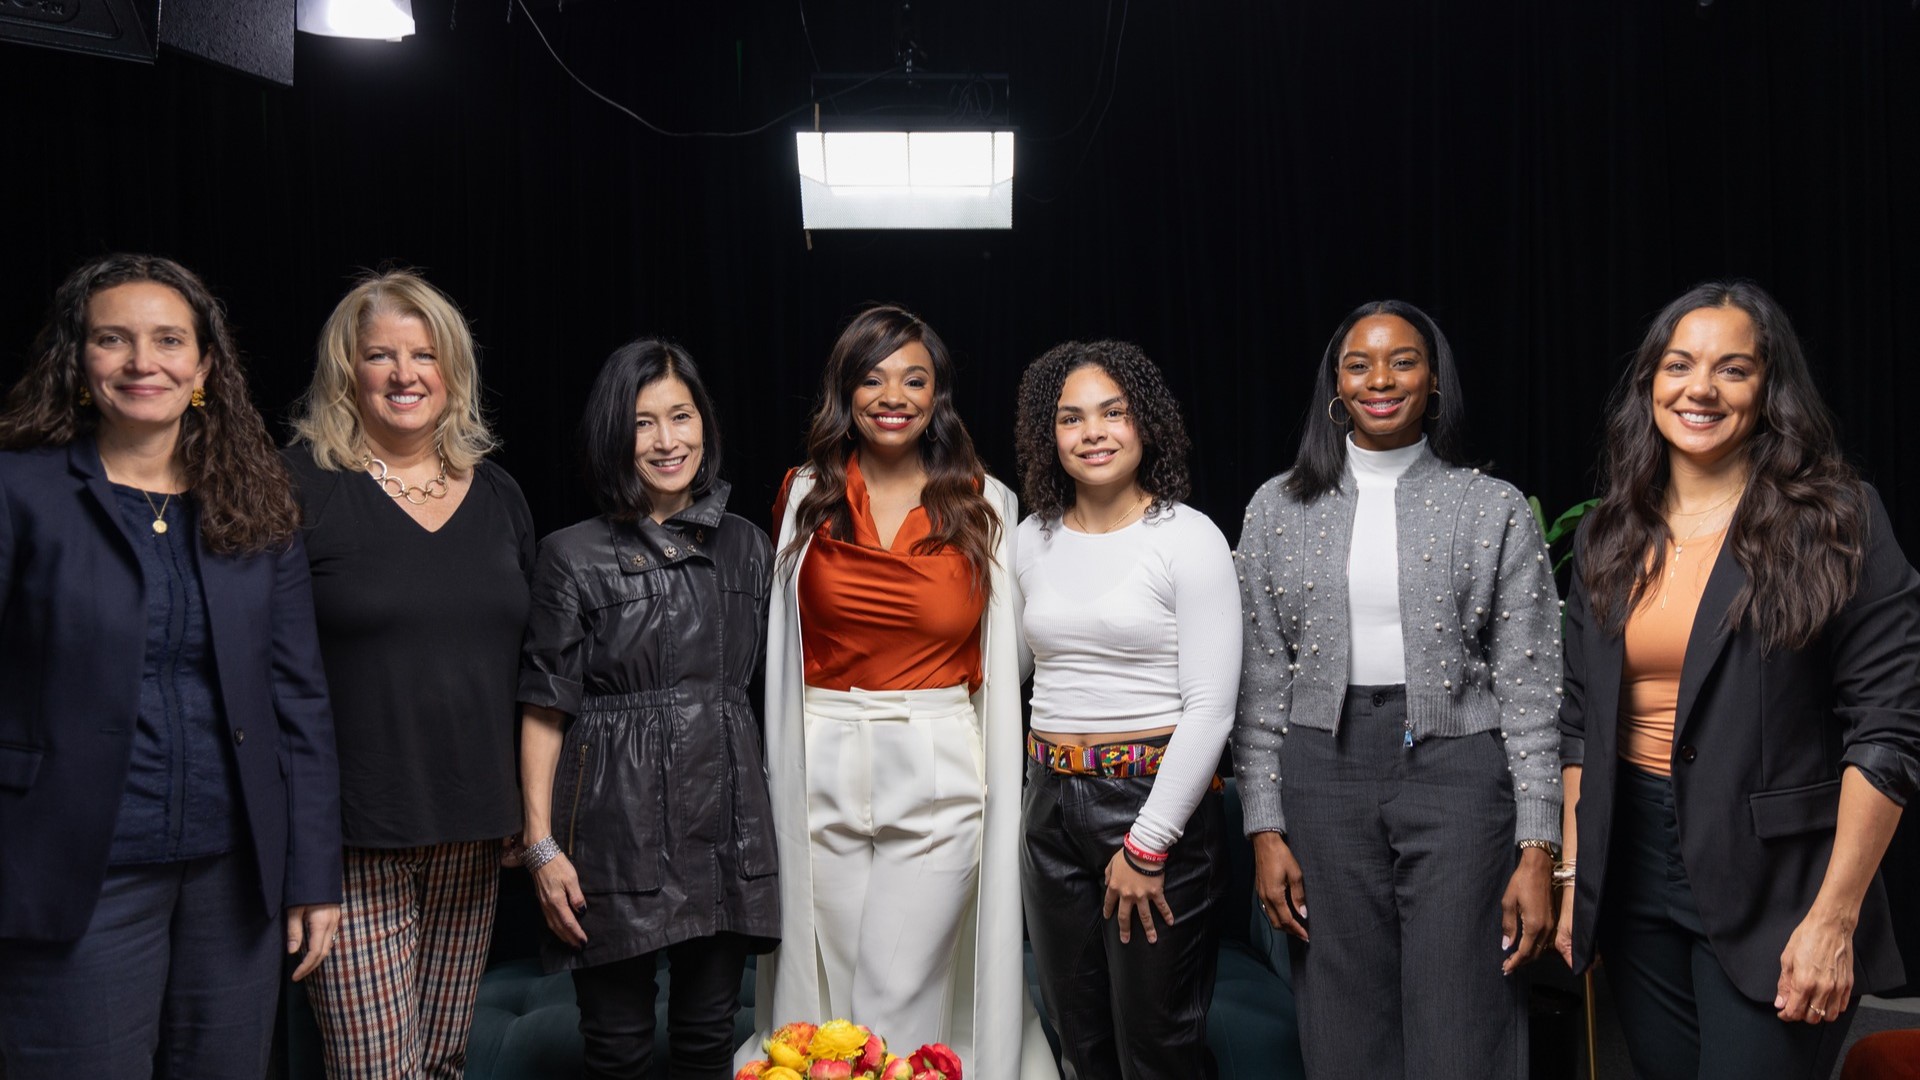 A new talk show in western Washington is set to launch during Women's History Month.